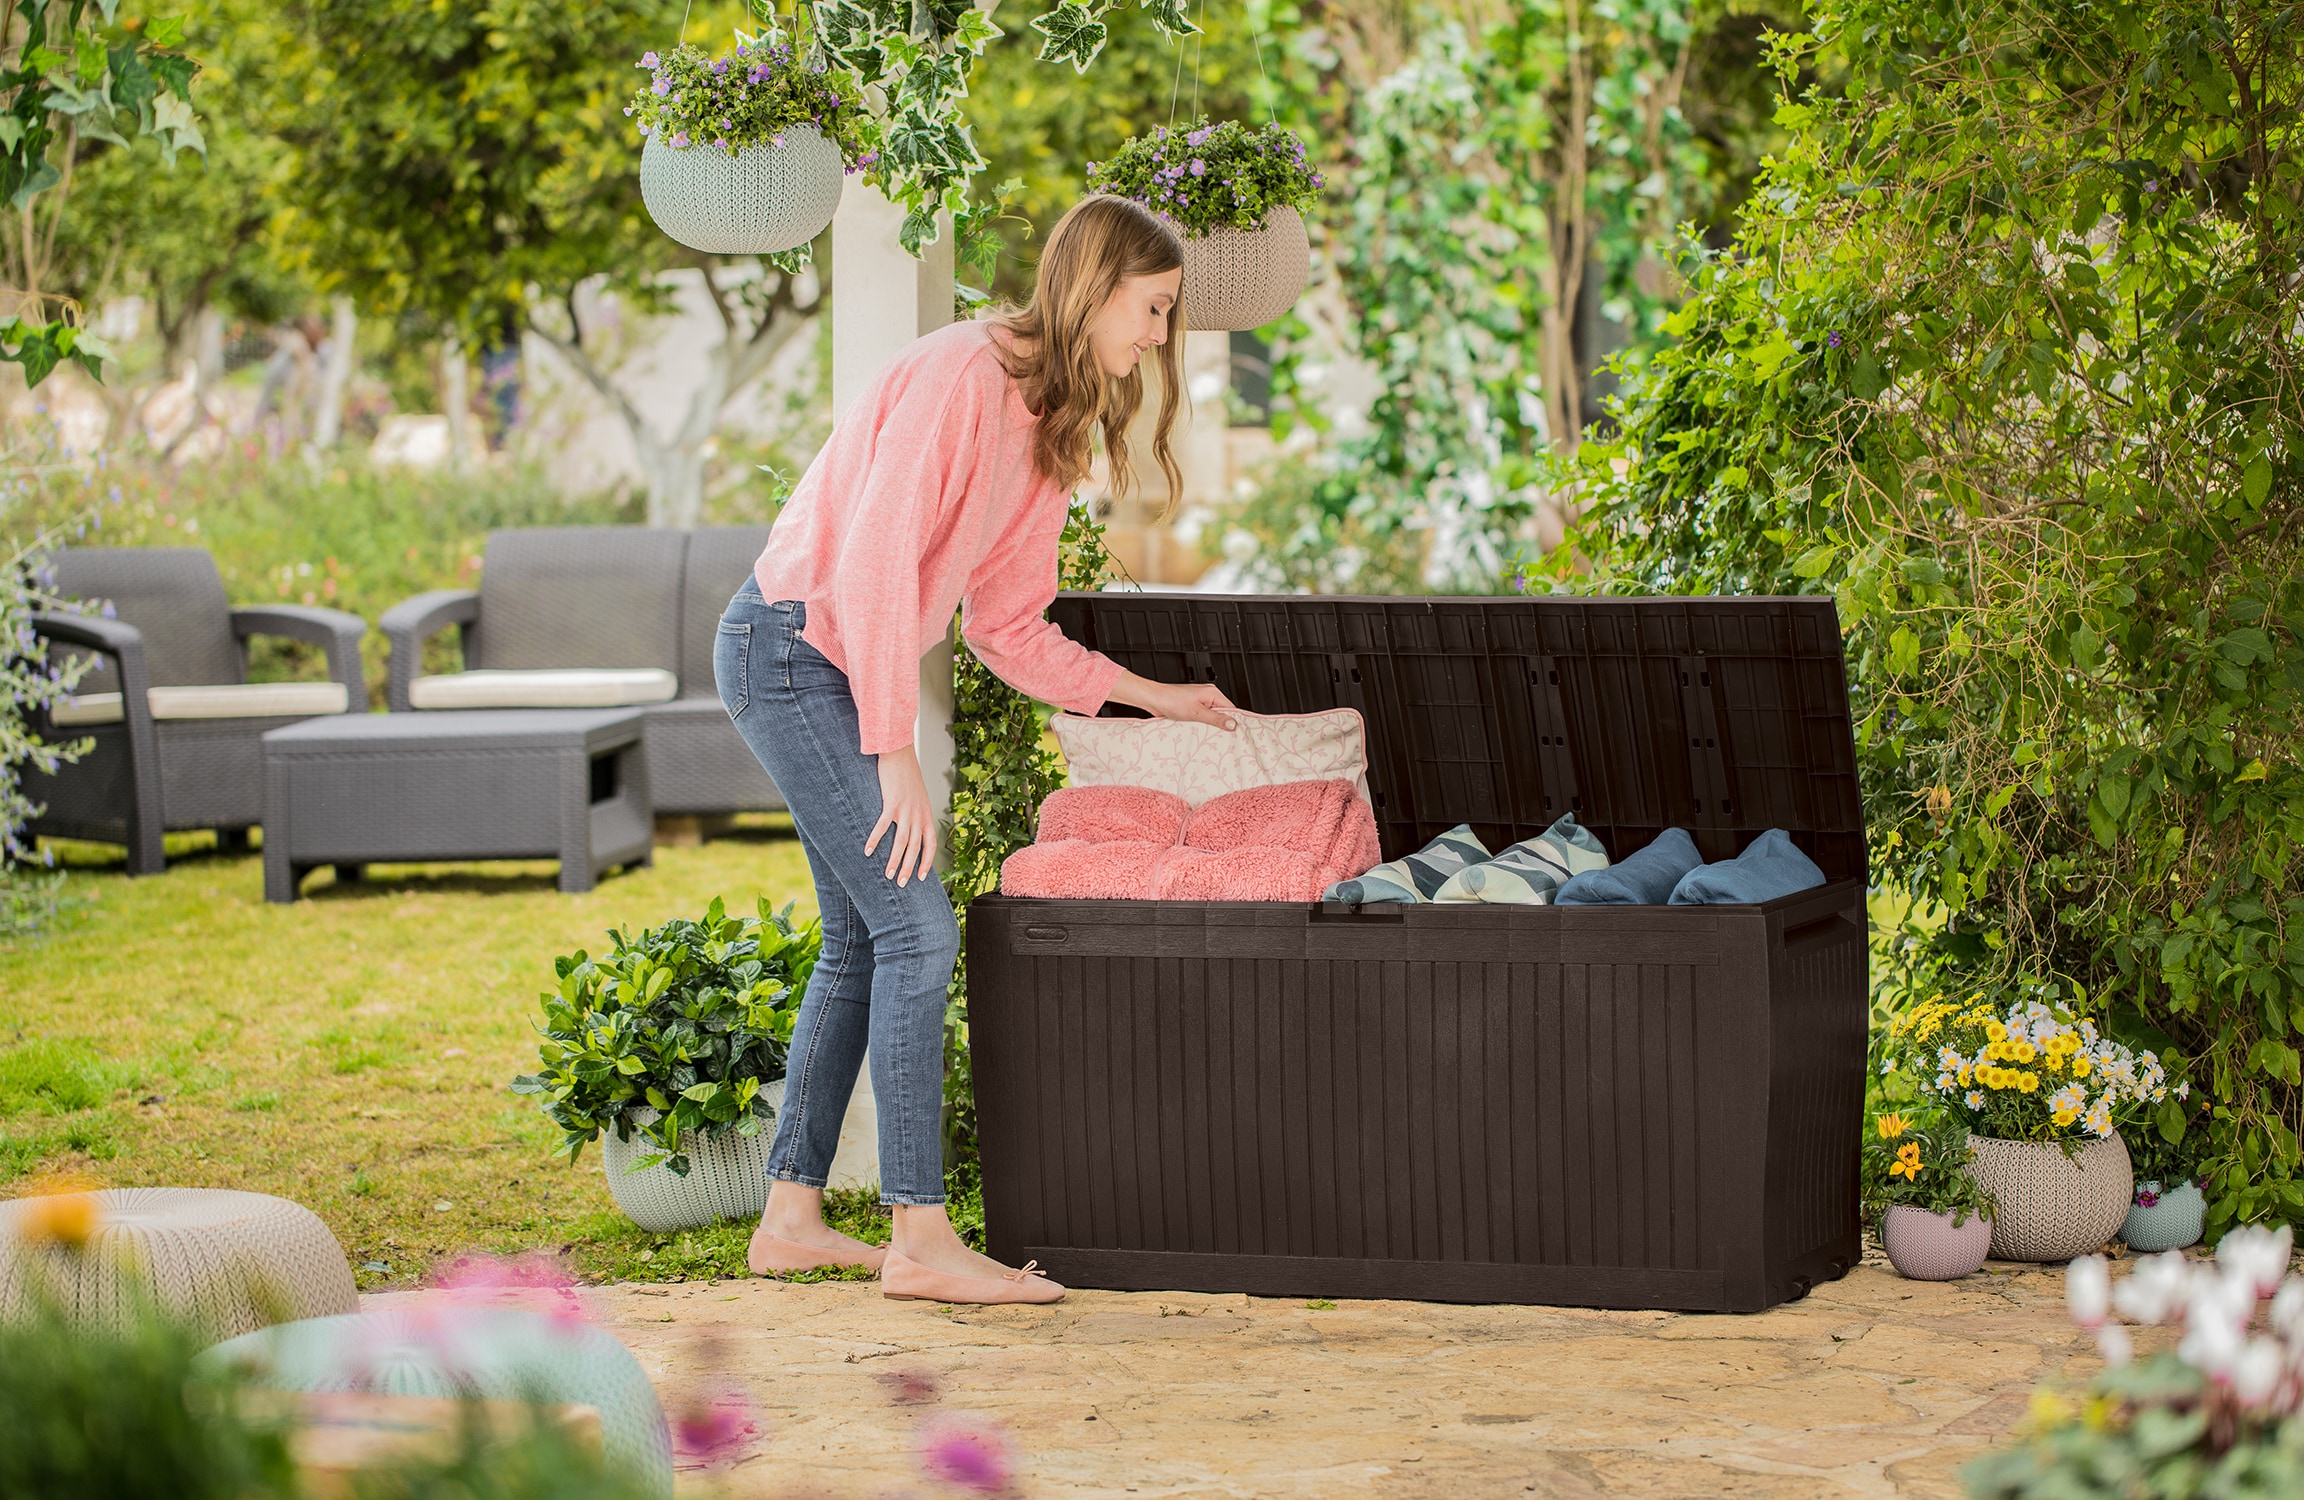 Dextrus Extra Large Outdoor Deck Box - 230 Gallon Capacity for Outdoor  Furniture, Gardening Tools, and Sporting/Pools Gear - Durable Weather  Resistant